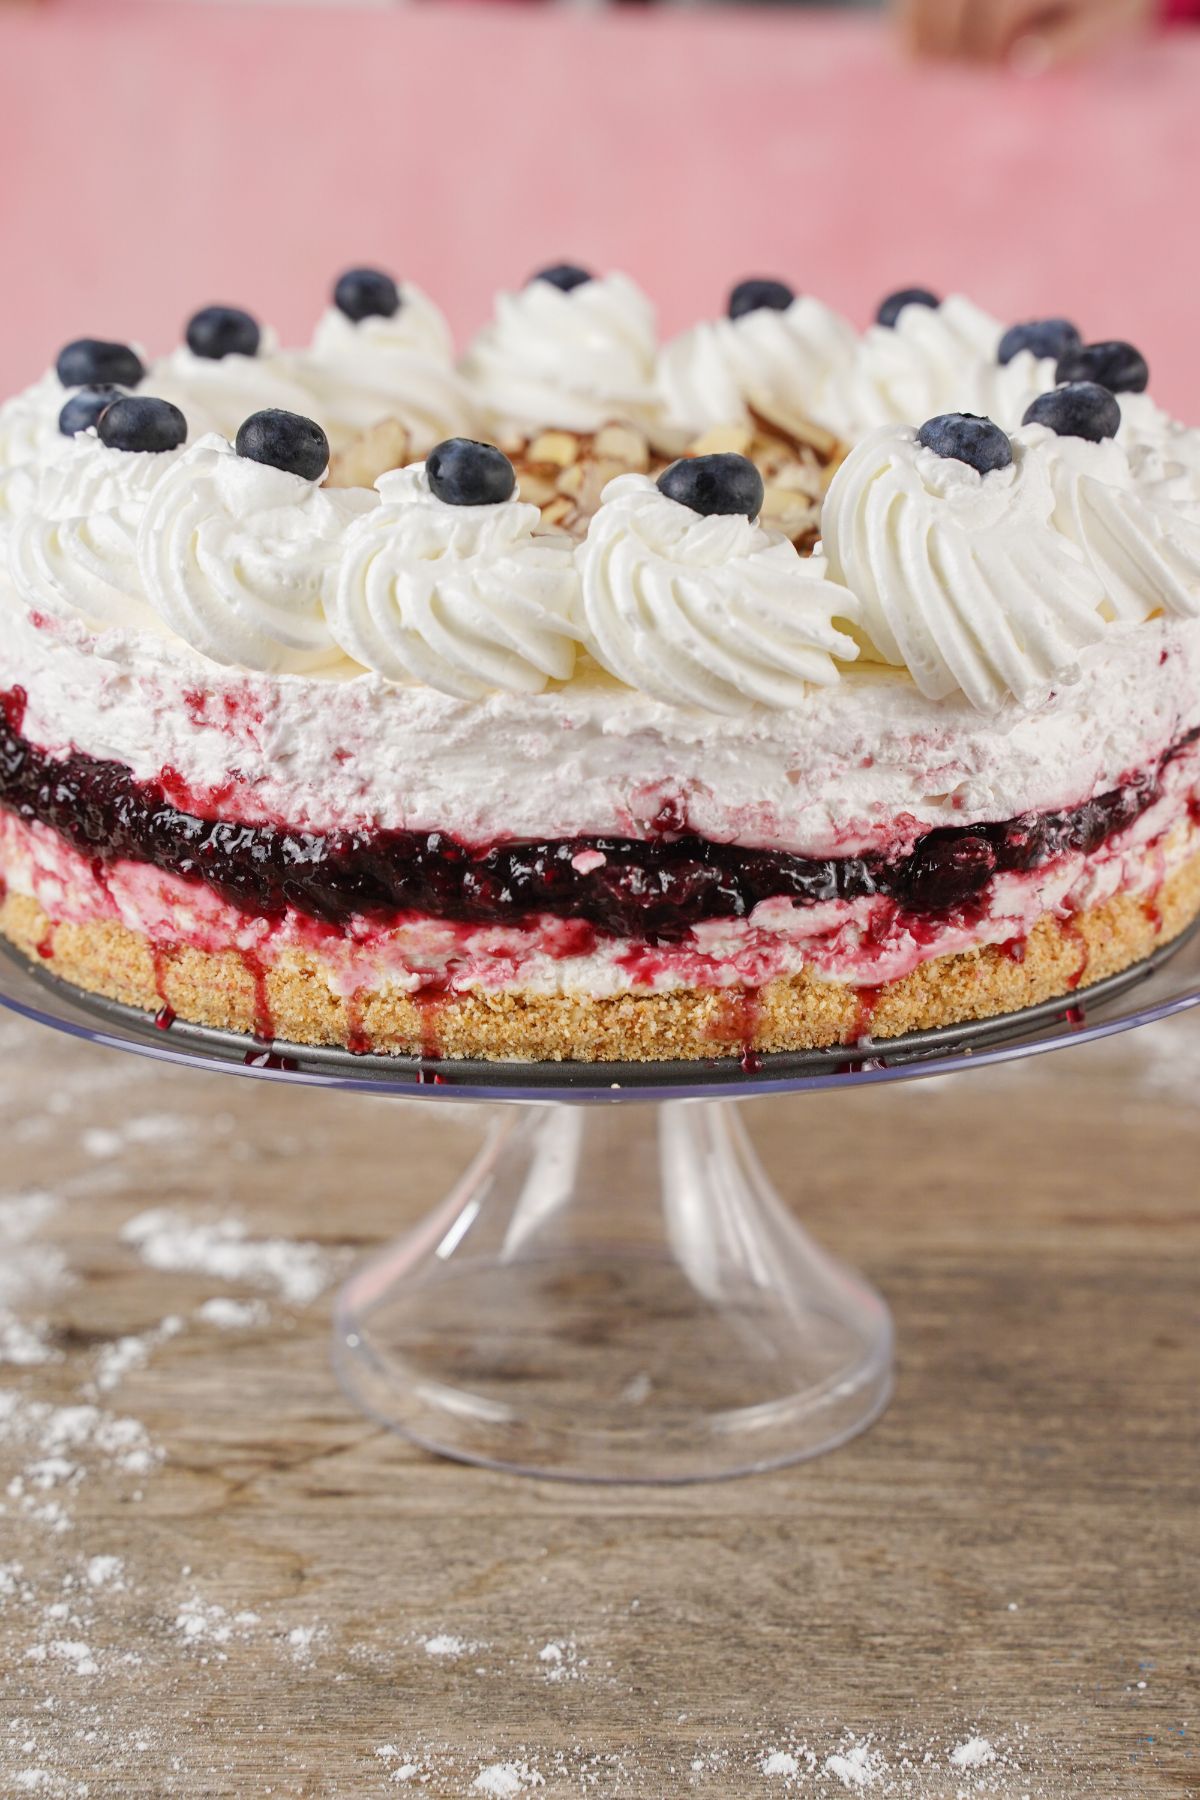 blueberry cheesecake topped with whipped cream, almonds, and berries on a glass cake platter